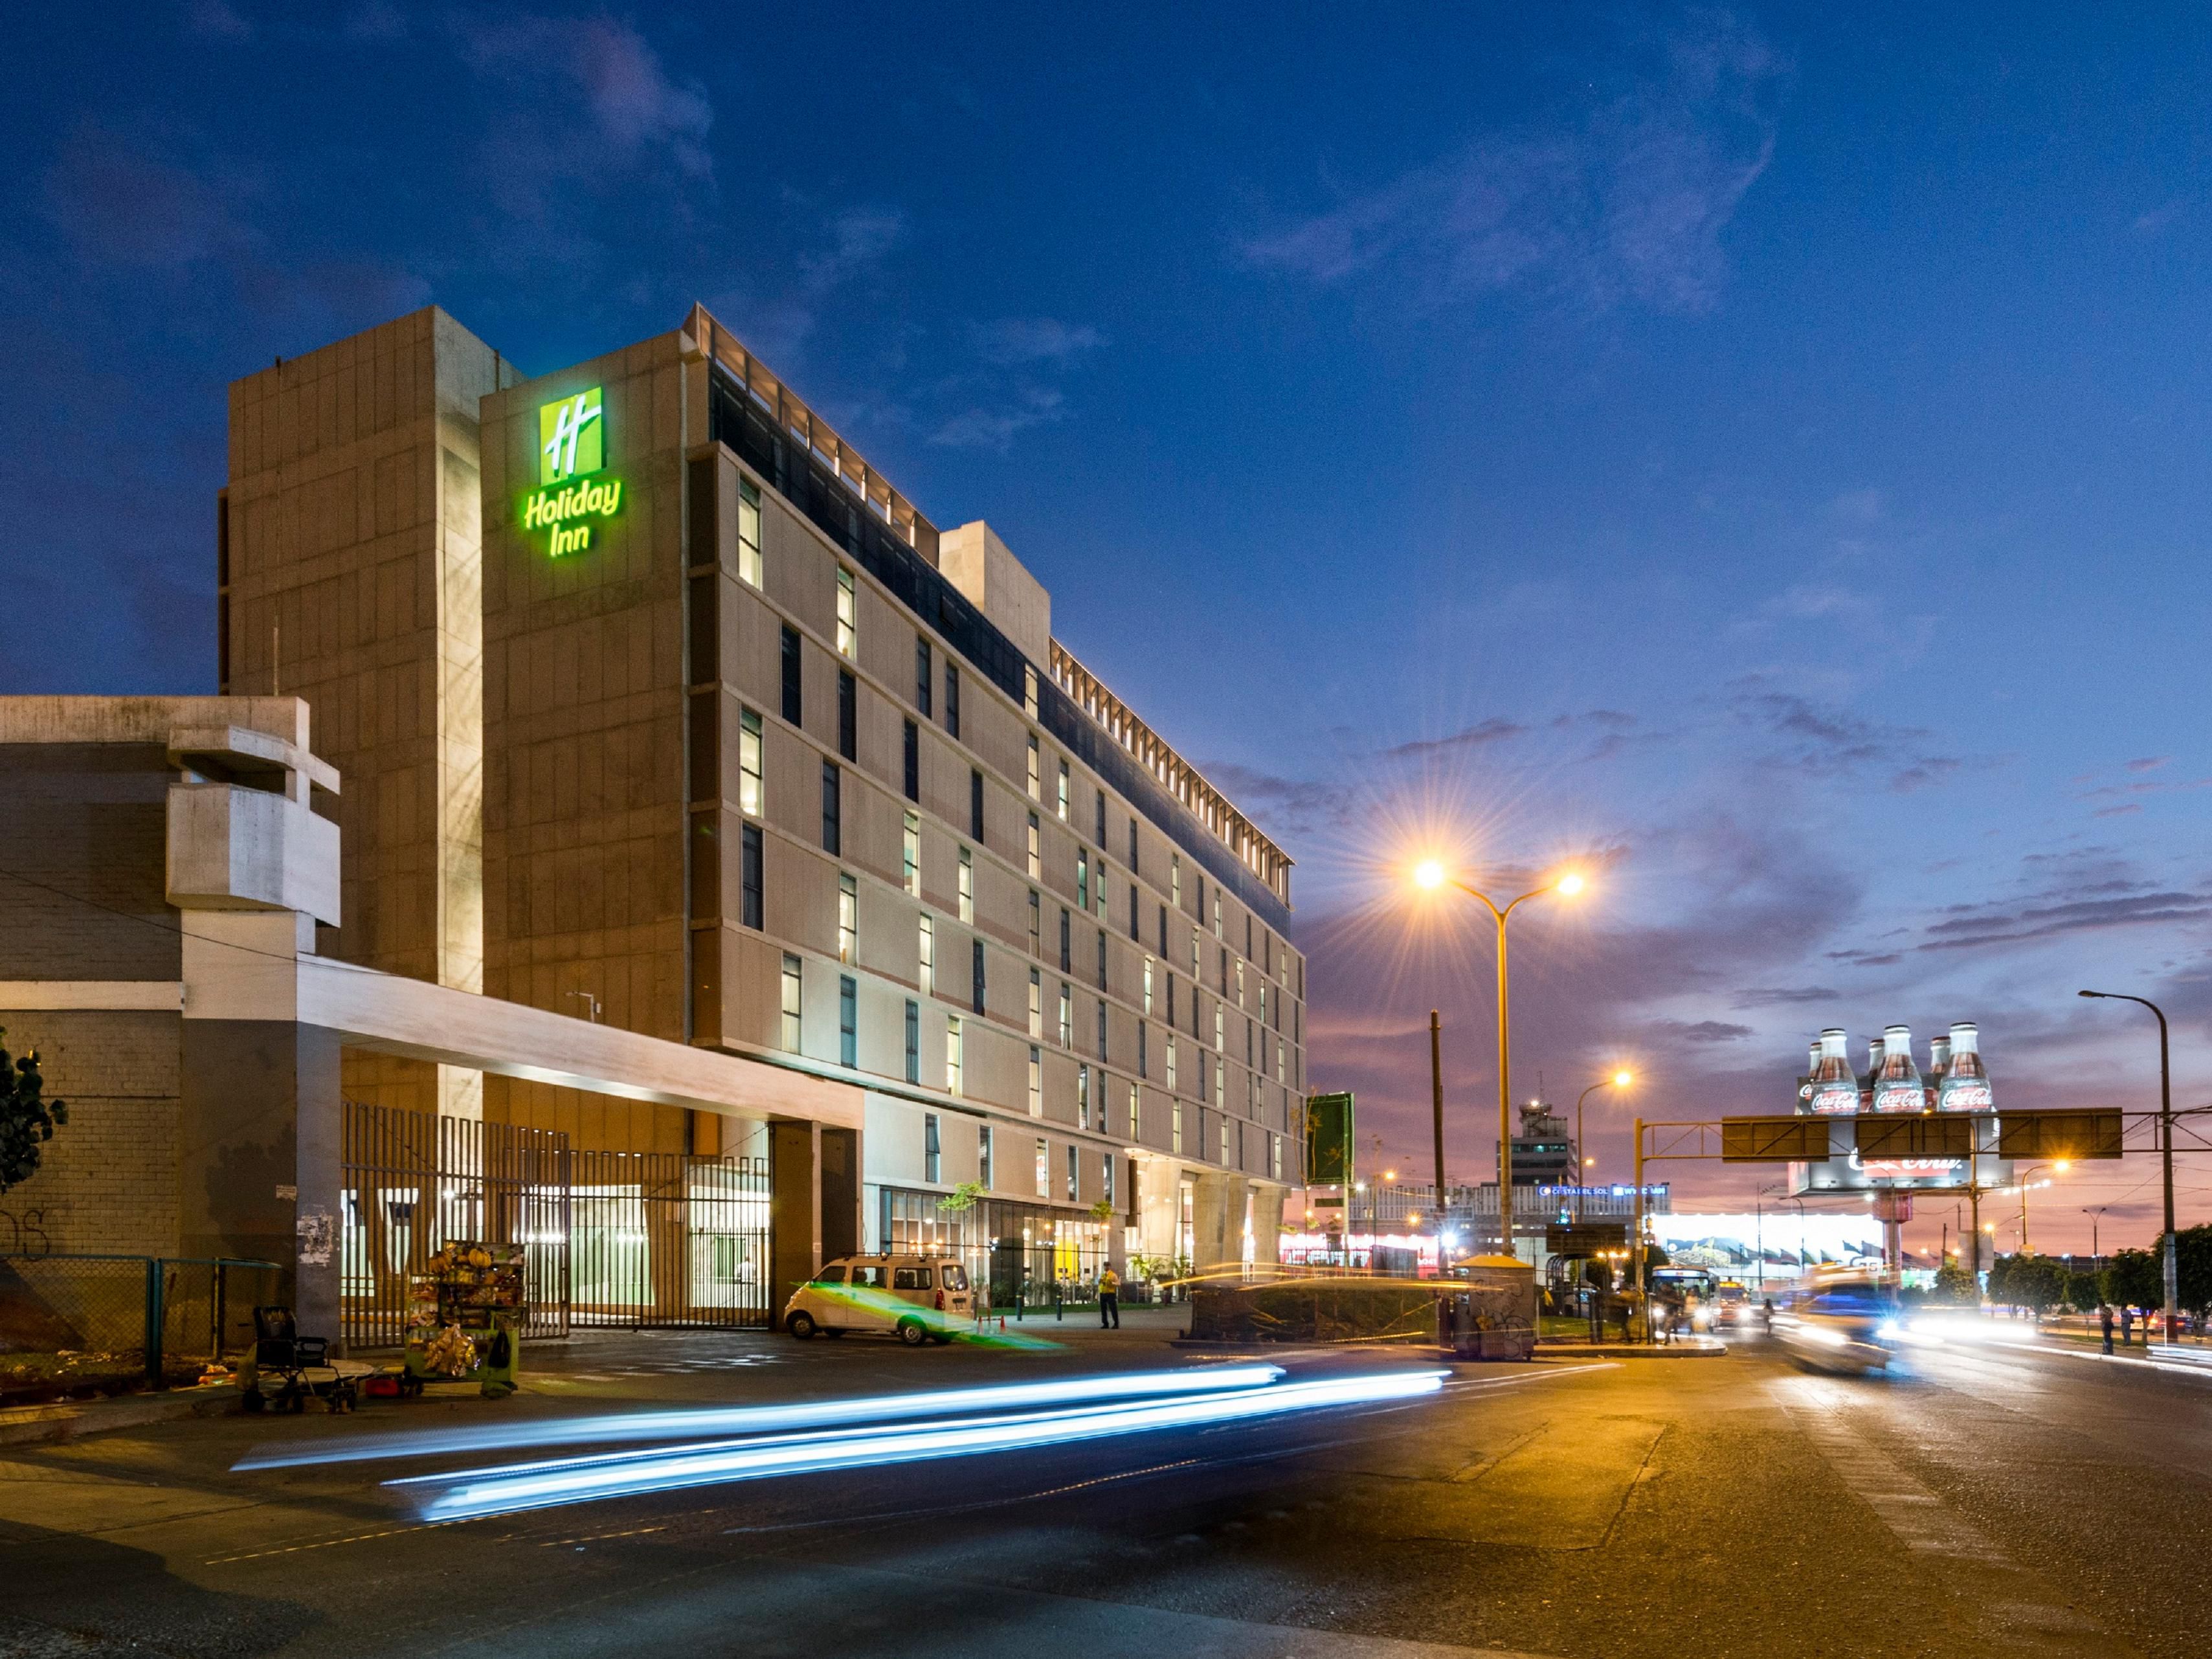 Optimize your time and stay in front of the Jorge Chavez airport in Lima. We offer free shuttle service from the airport to the hotel.

In less than 5 minutes, live the experience of staying at Holiday Inn Lima Airport, and arrive on time for your next flight.